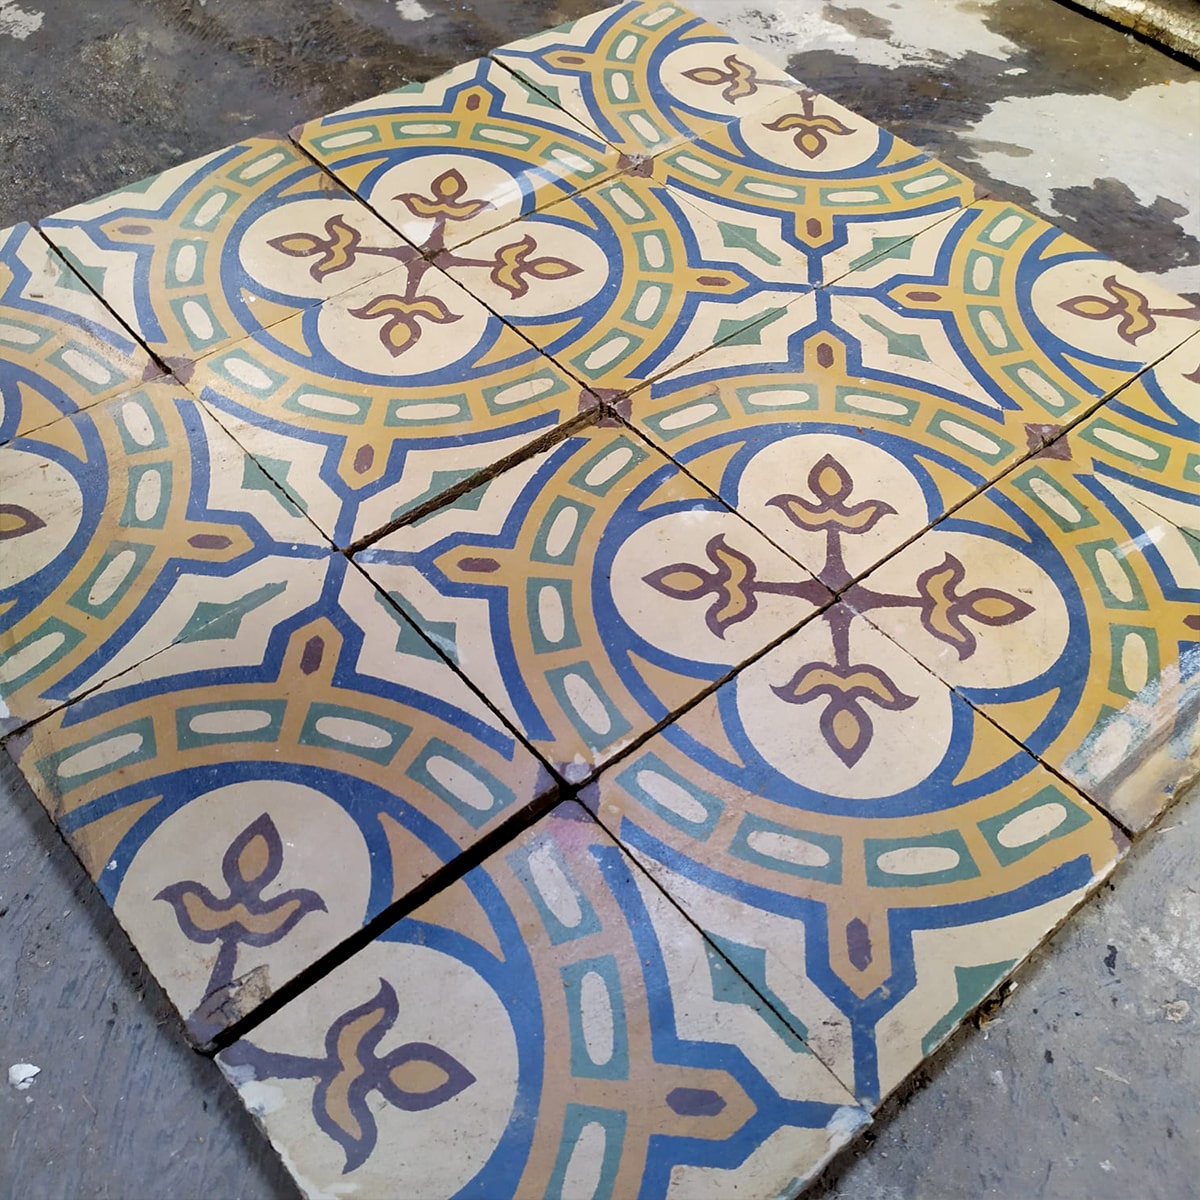 Antique yellow and blue cement tiles, 17x17cm.